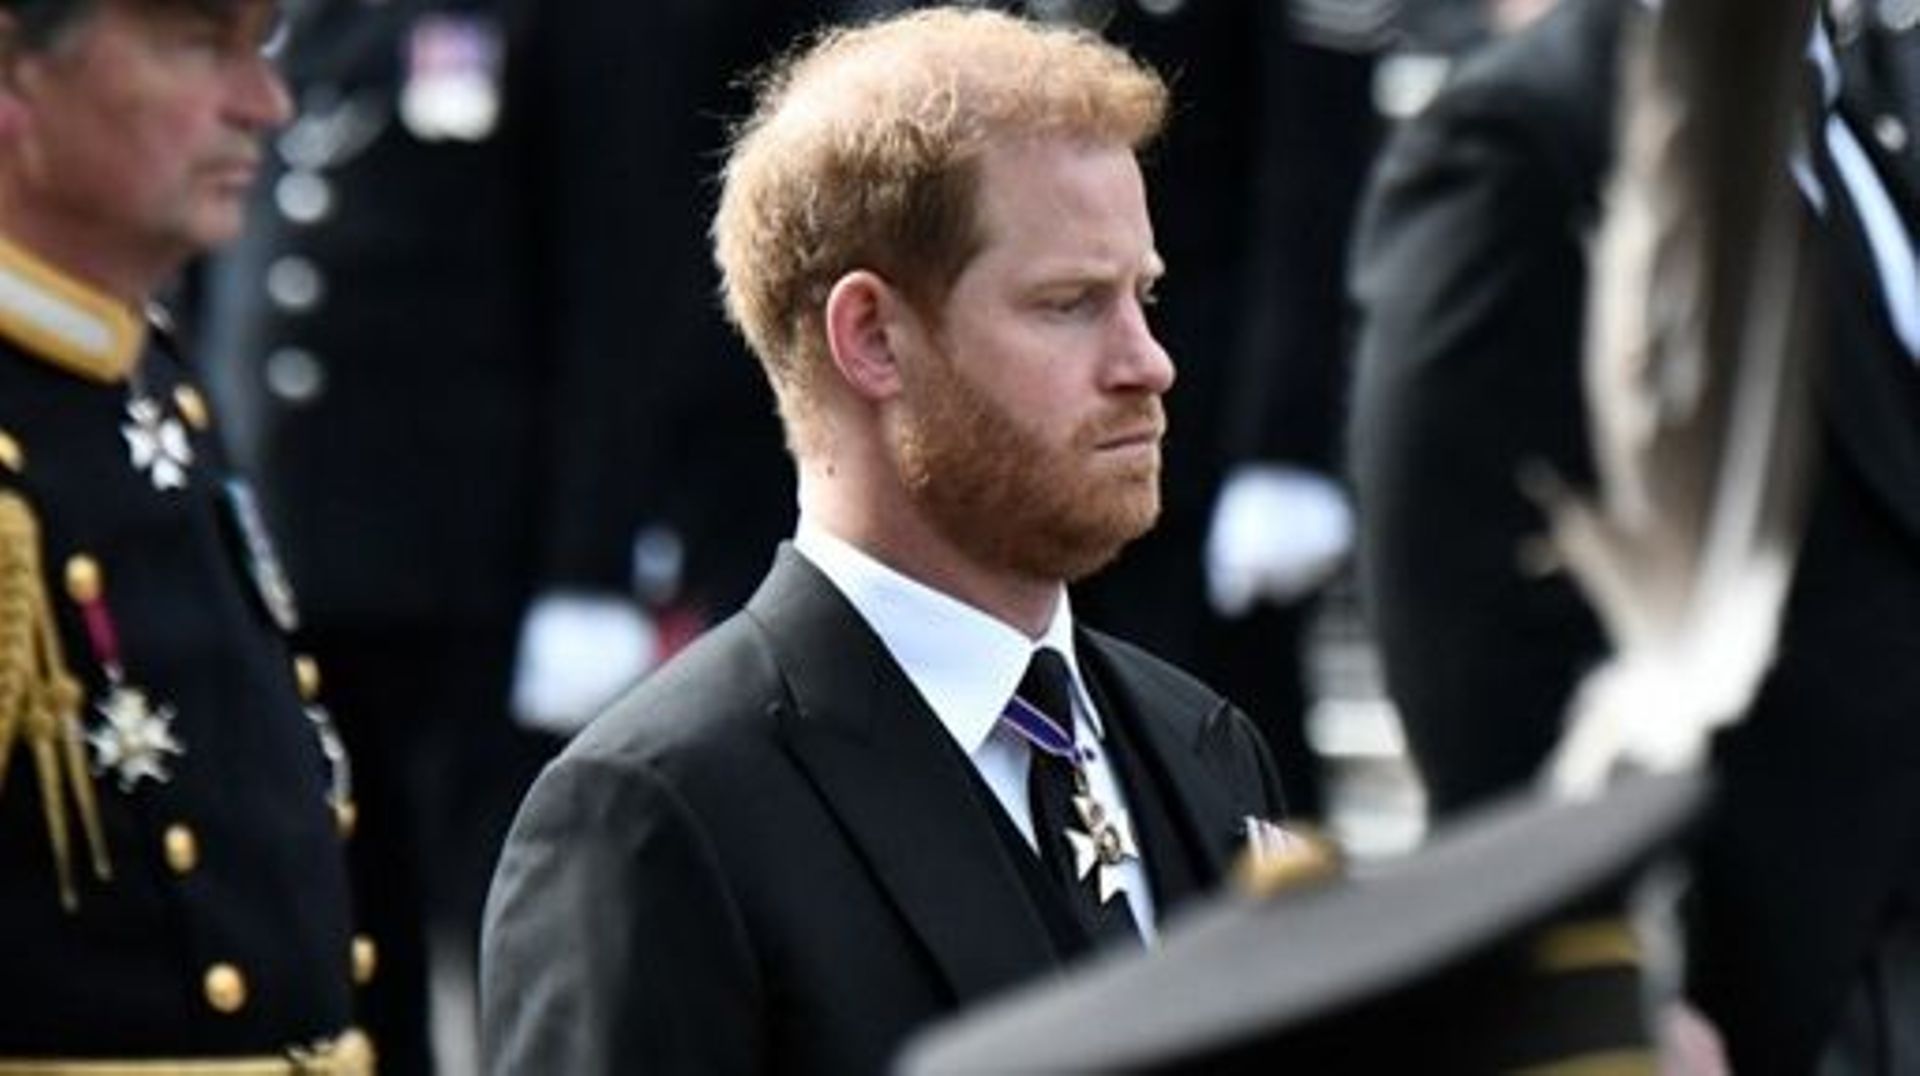 Britain's Prince Harry, Duke of Sussex follows the coffin of Queen Elizabeth II, draped in the Royal Standard, on the State Gun Carriage of the Royal Navy, as it travels from Westminster Abbey to Wellington Arch in London on September 19, 2022, after the 